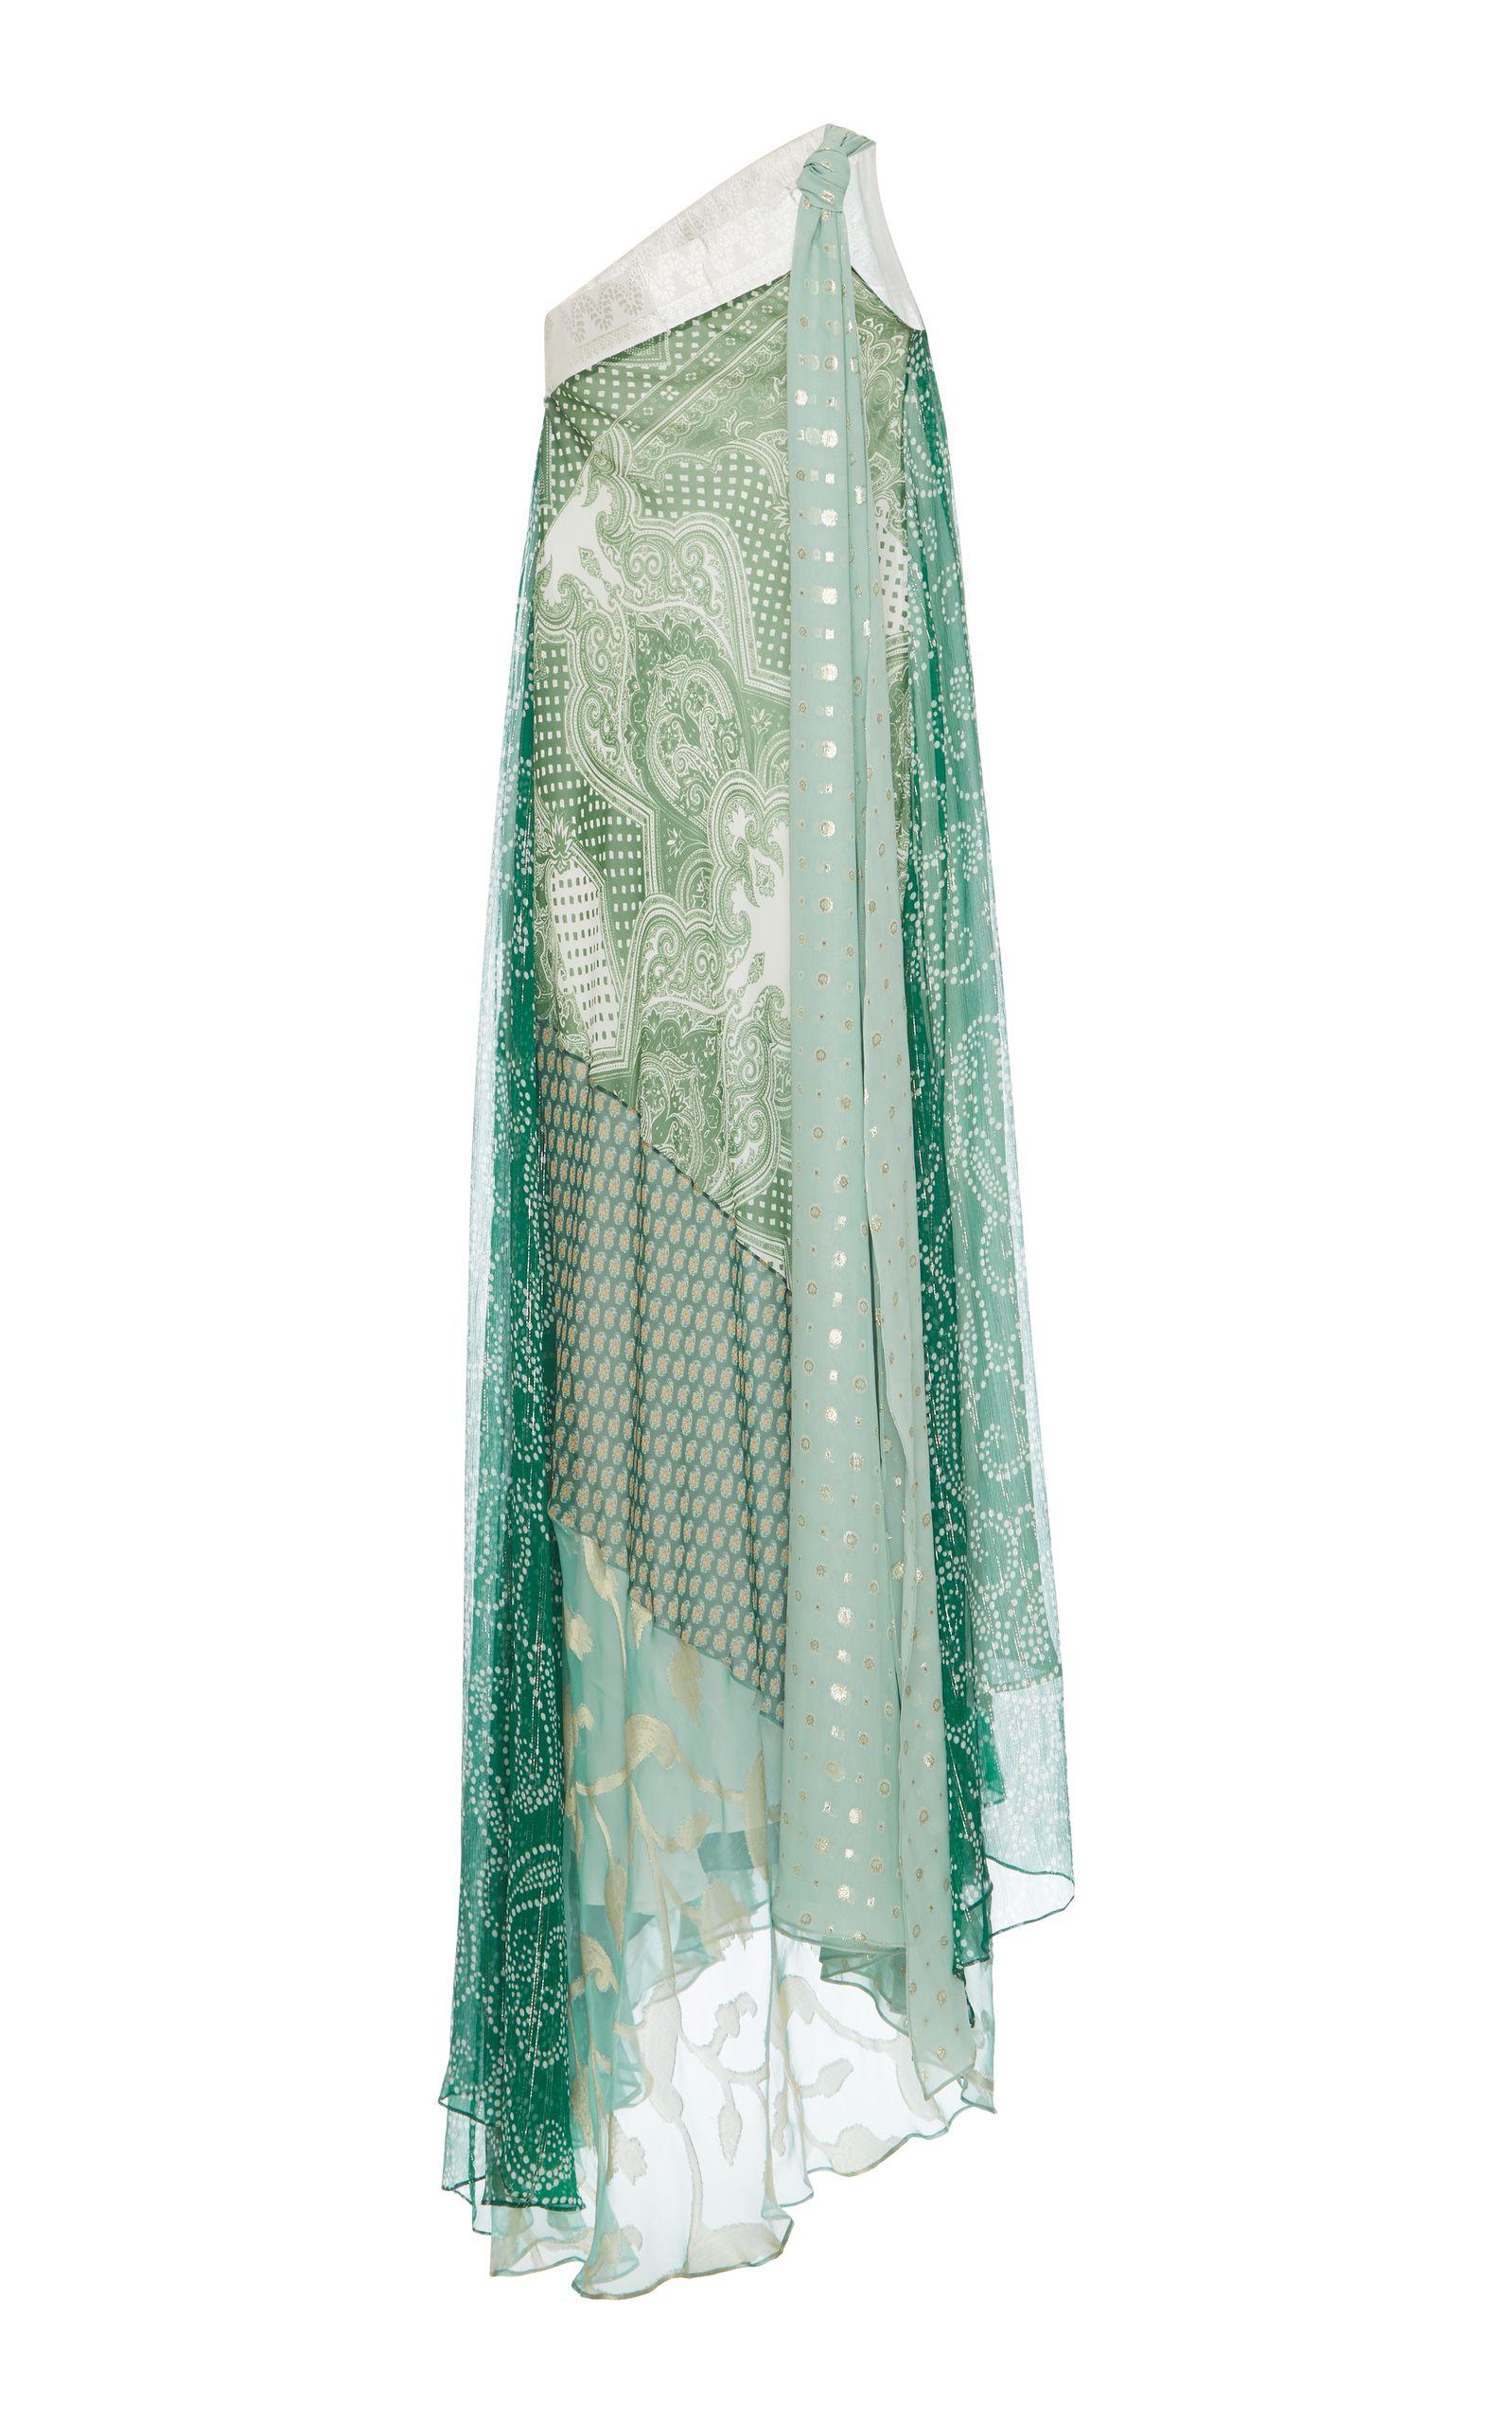 Etro SS18 Runway Green Wide Patchwork Paisley One Shoulder Dress / Gown

This stunning Etro runway gown features a one shoulder neckline, wide patchwork with green paisley print, a flowing train, and a side zip and hook closure. Brand new with tags.